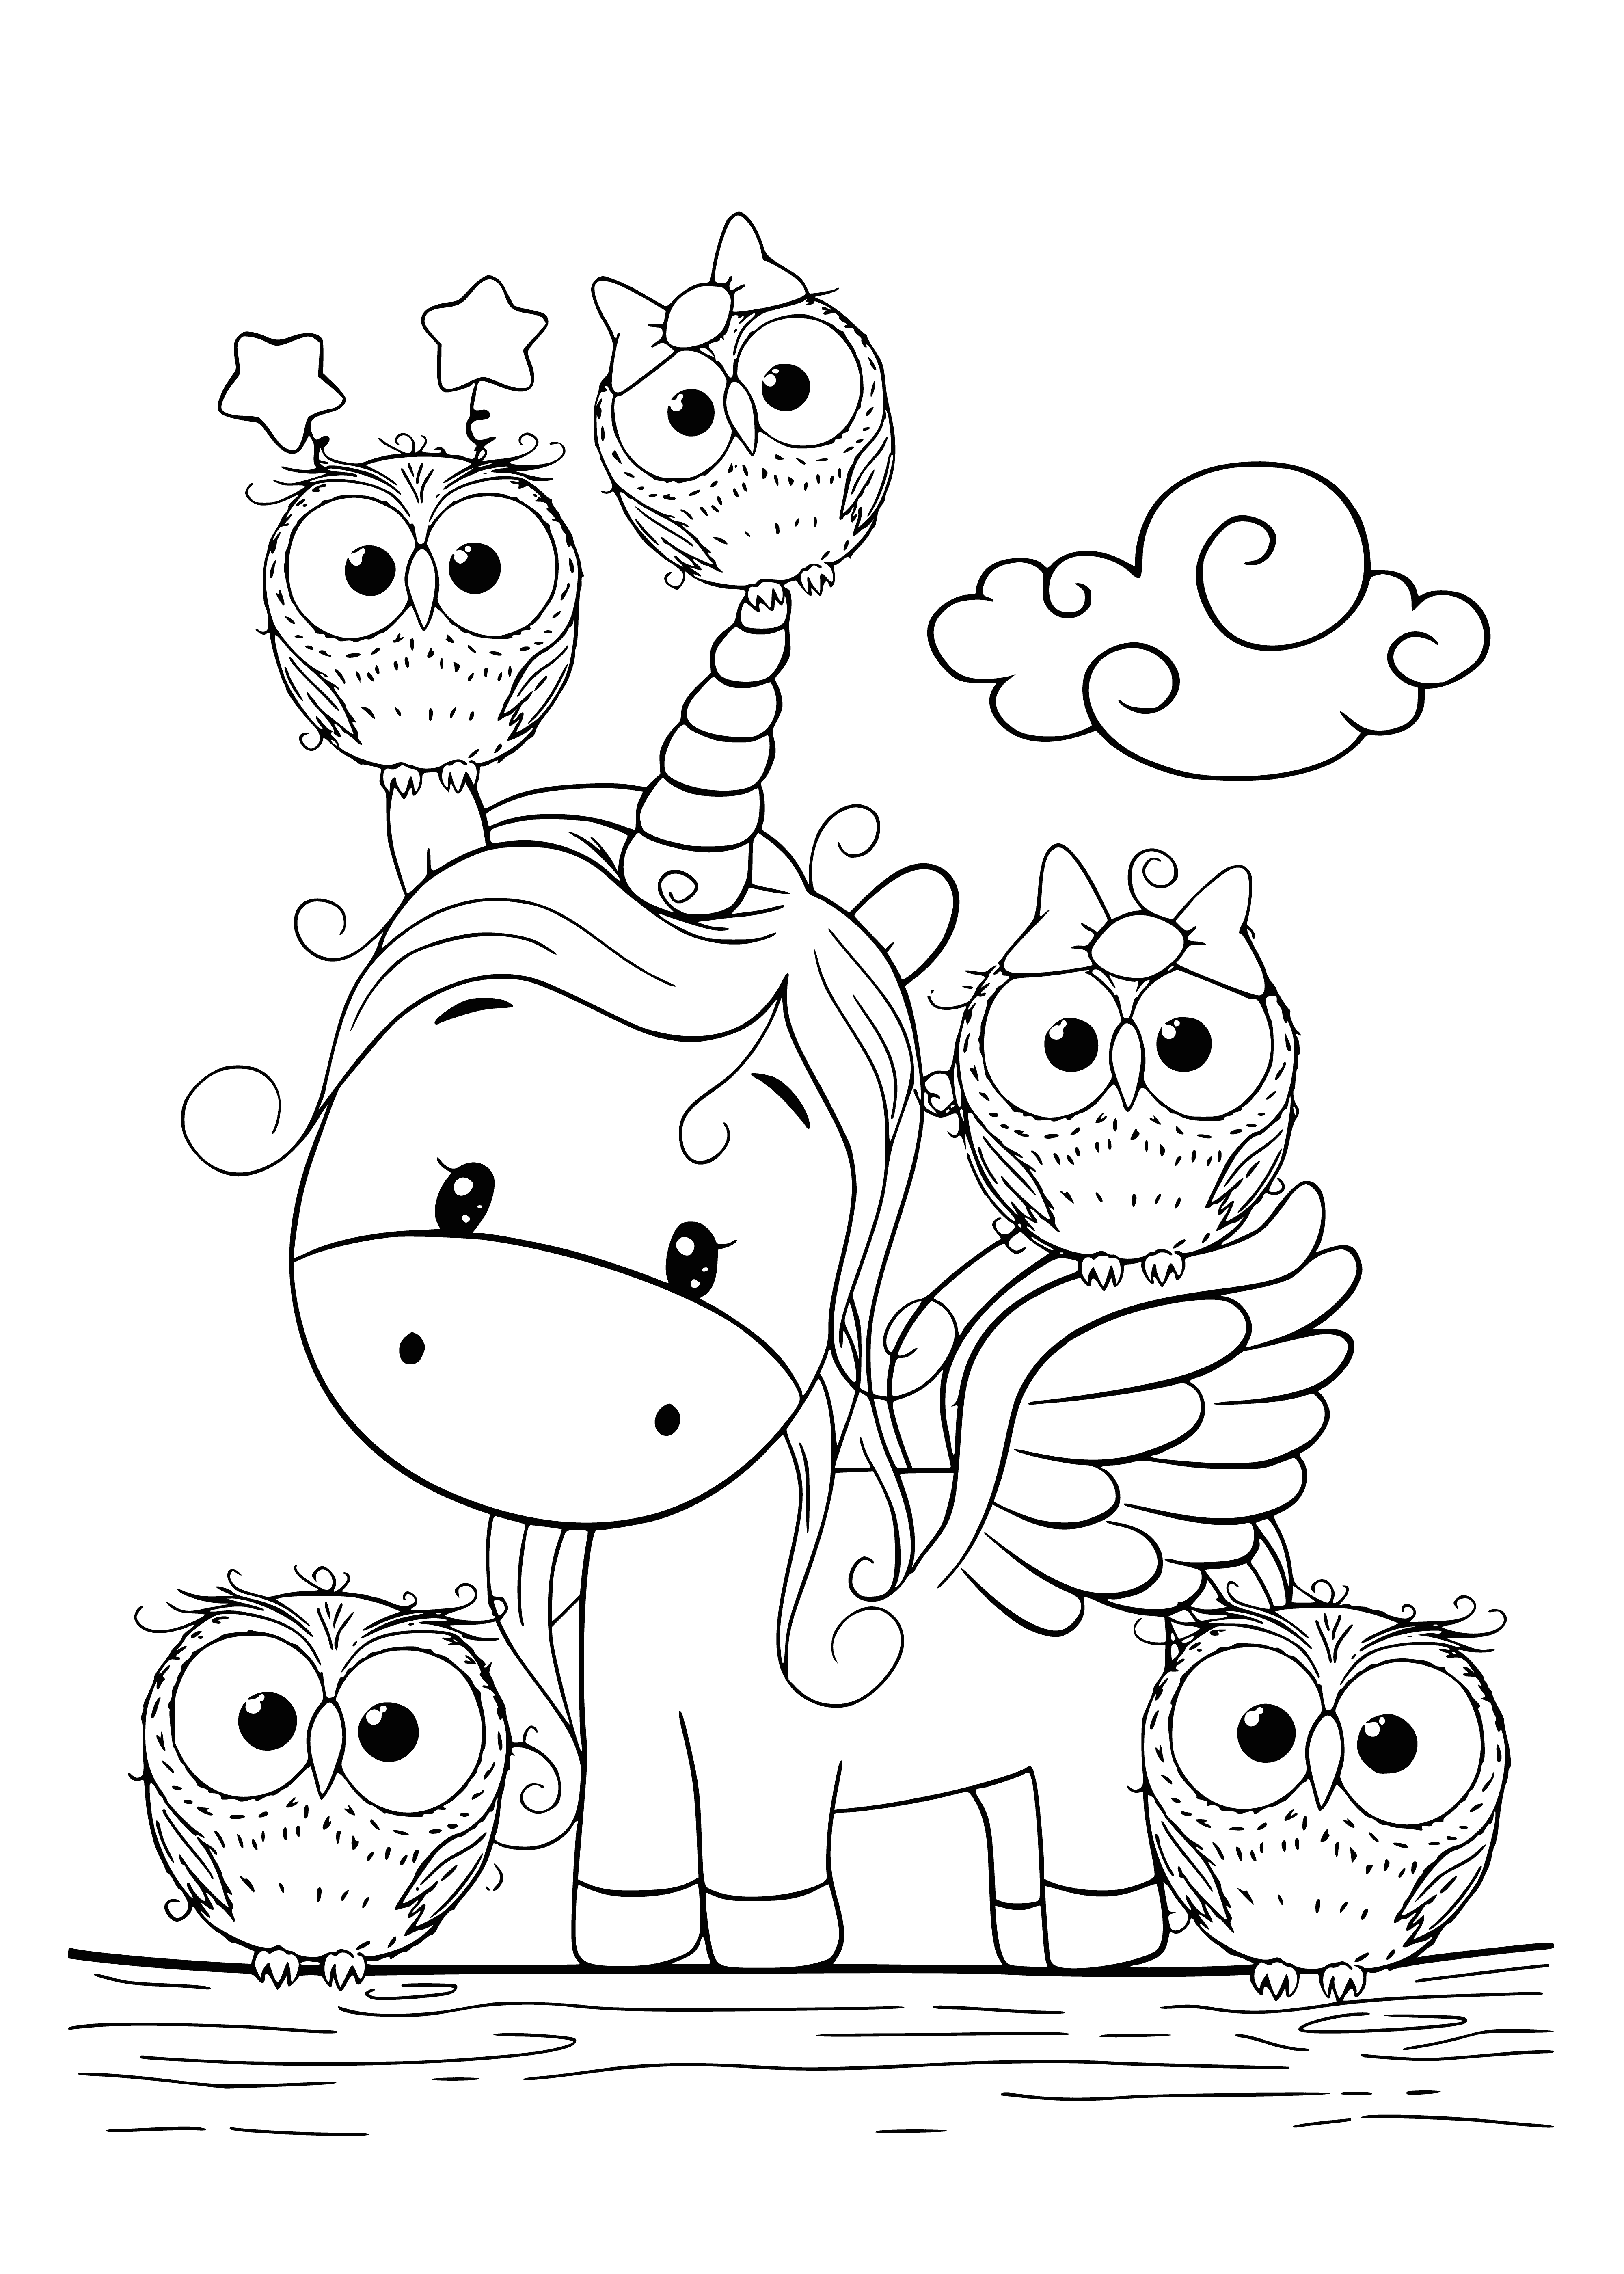 coloring page: Four colorful owlets surround a rainbow-maned unicorn standing on a cloud with twinkling stars.